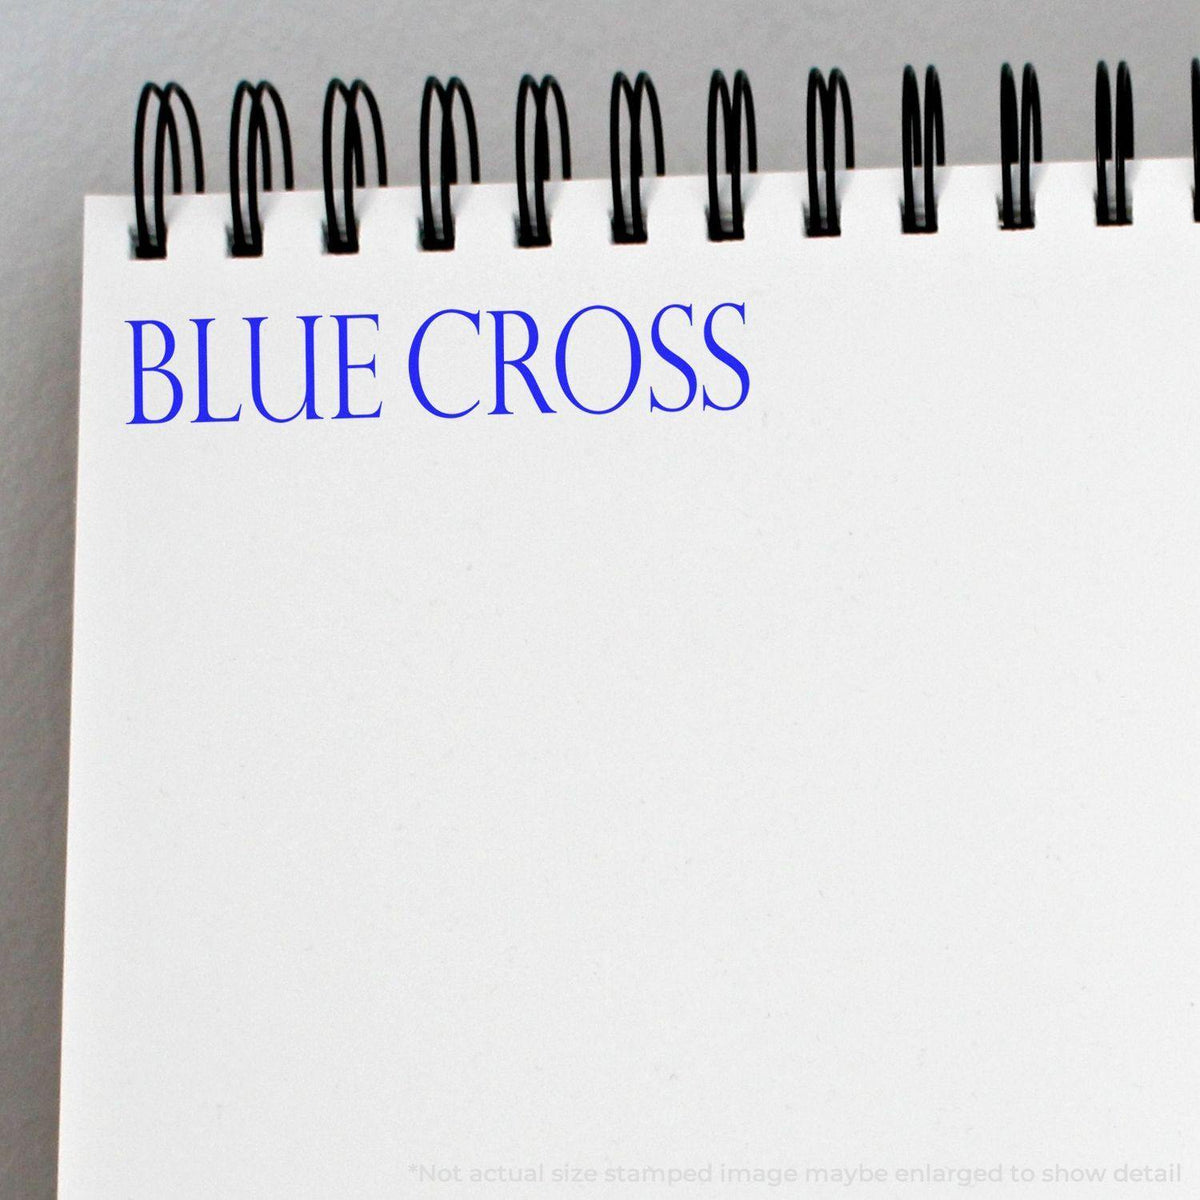 Large Self Inking Blue Cross Stamp In Use Photo